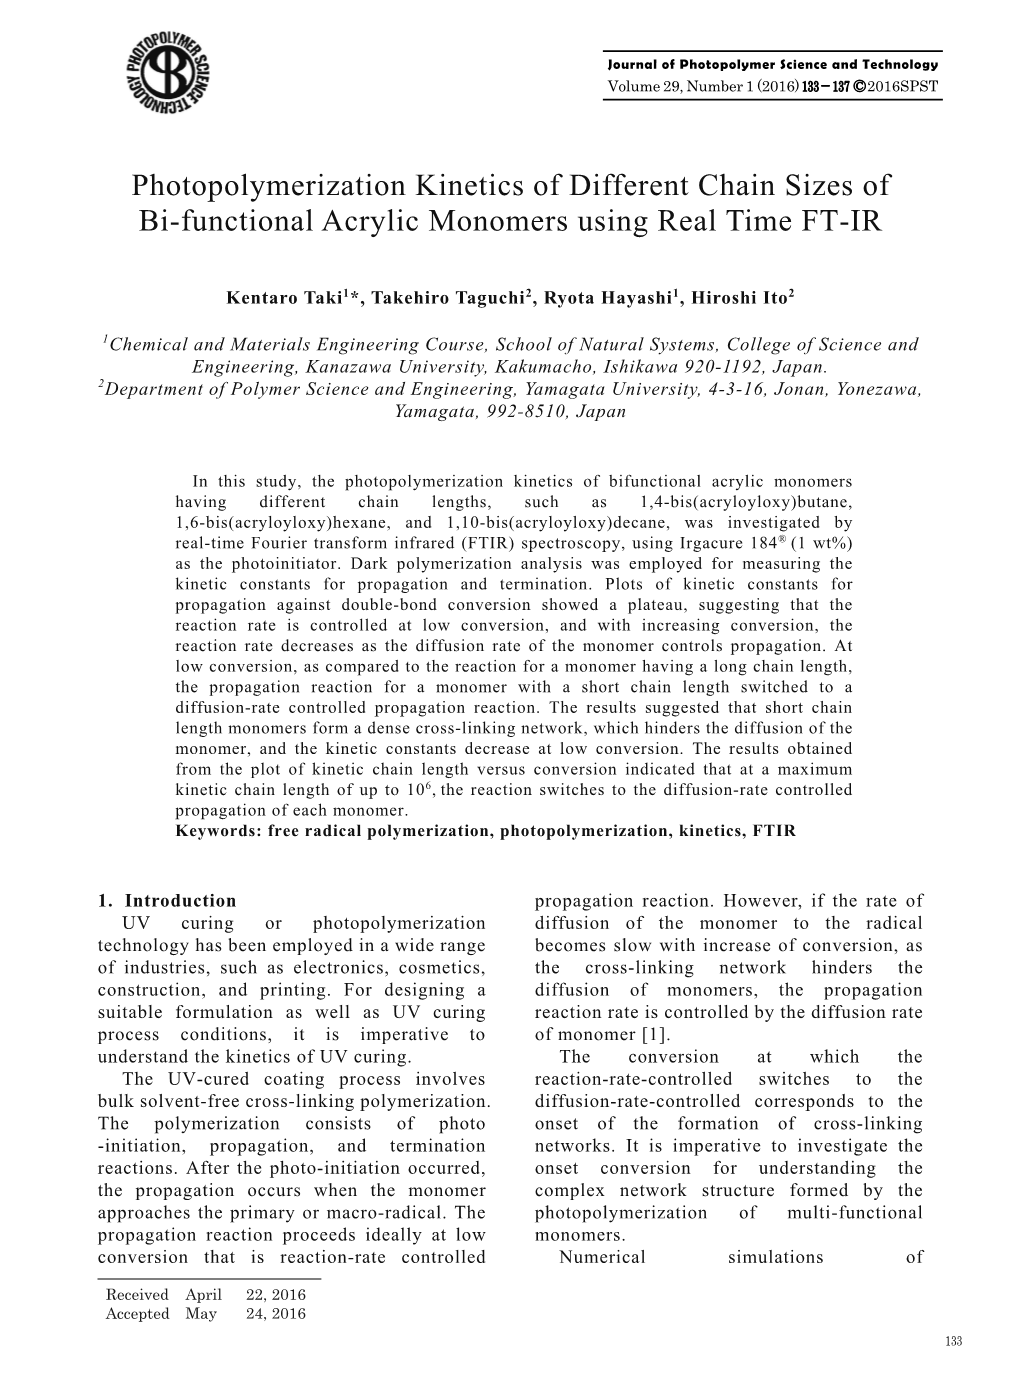 Photopolymerization Kinetics of Different Chain Sizes of Bi-Functional Acrylic Monomers Using Real Time FT-IR